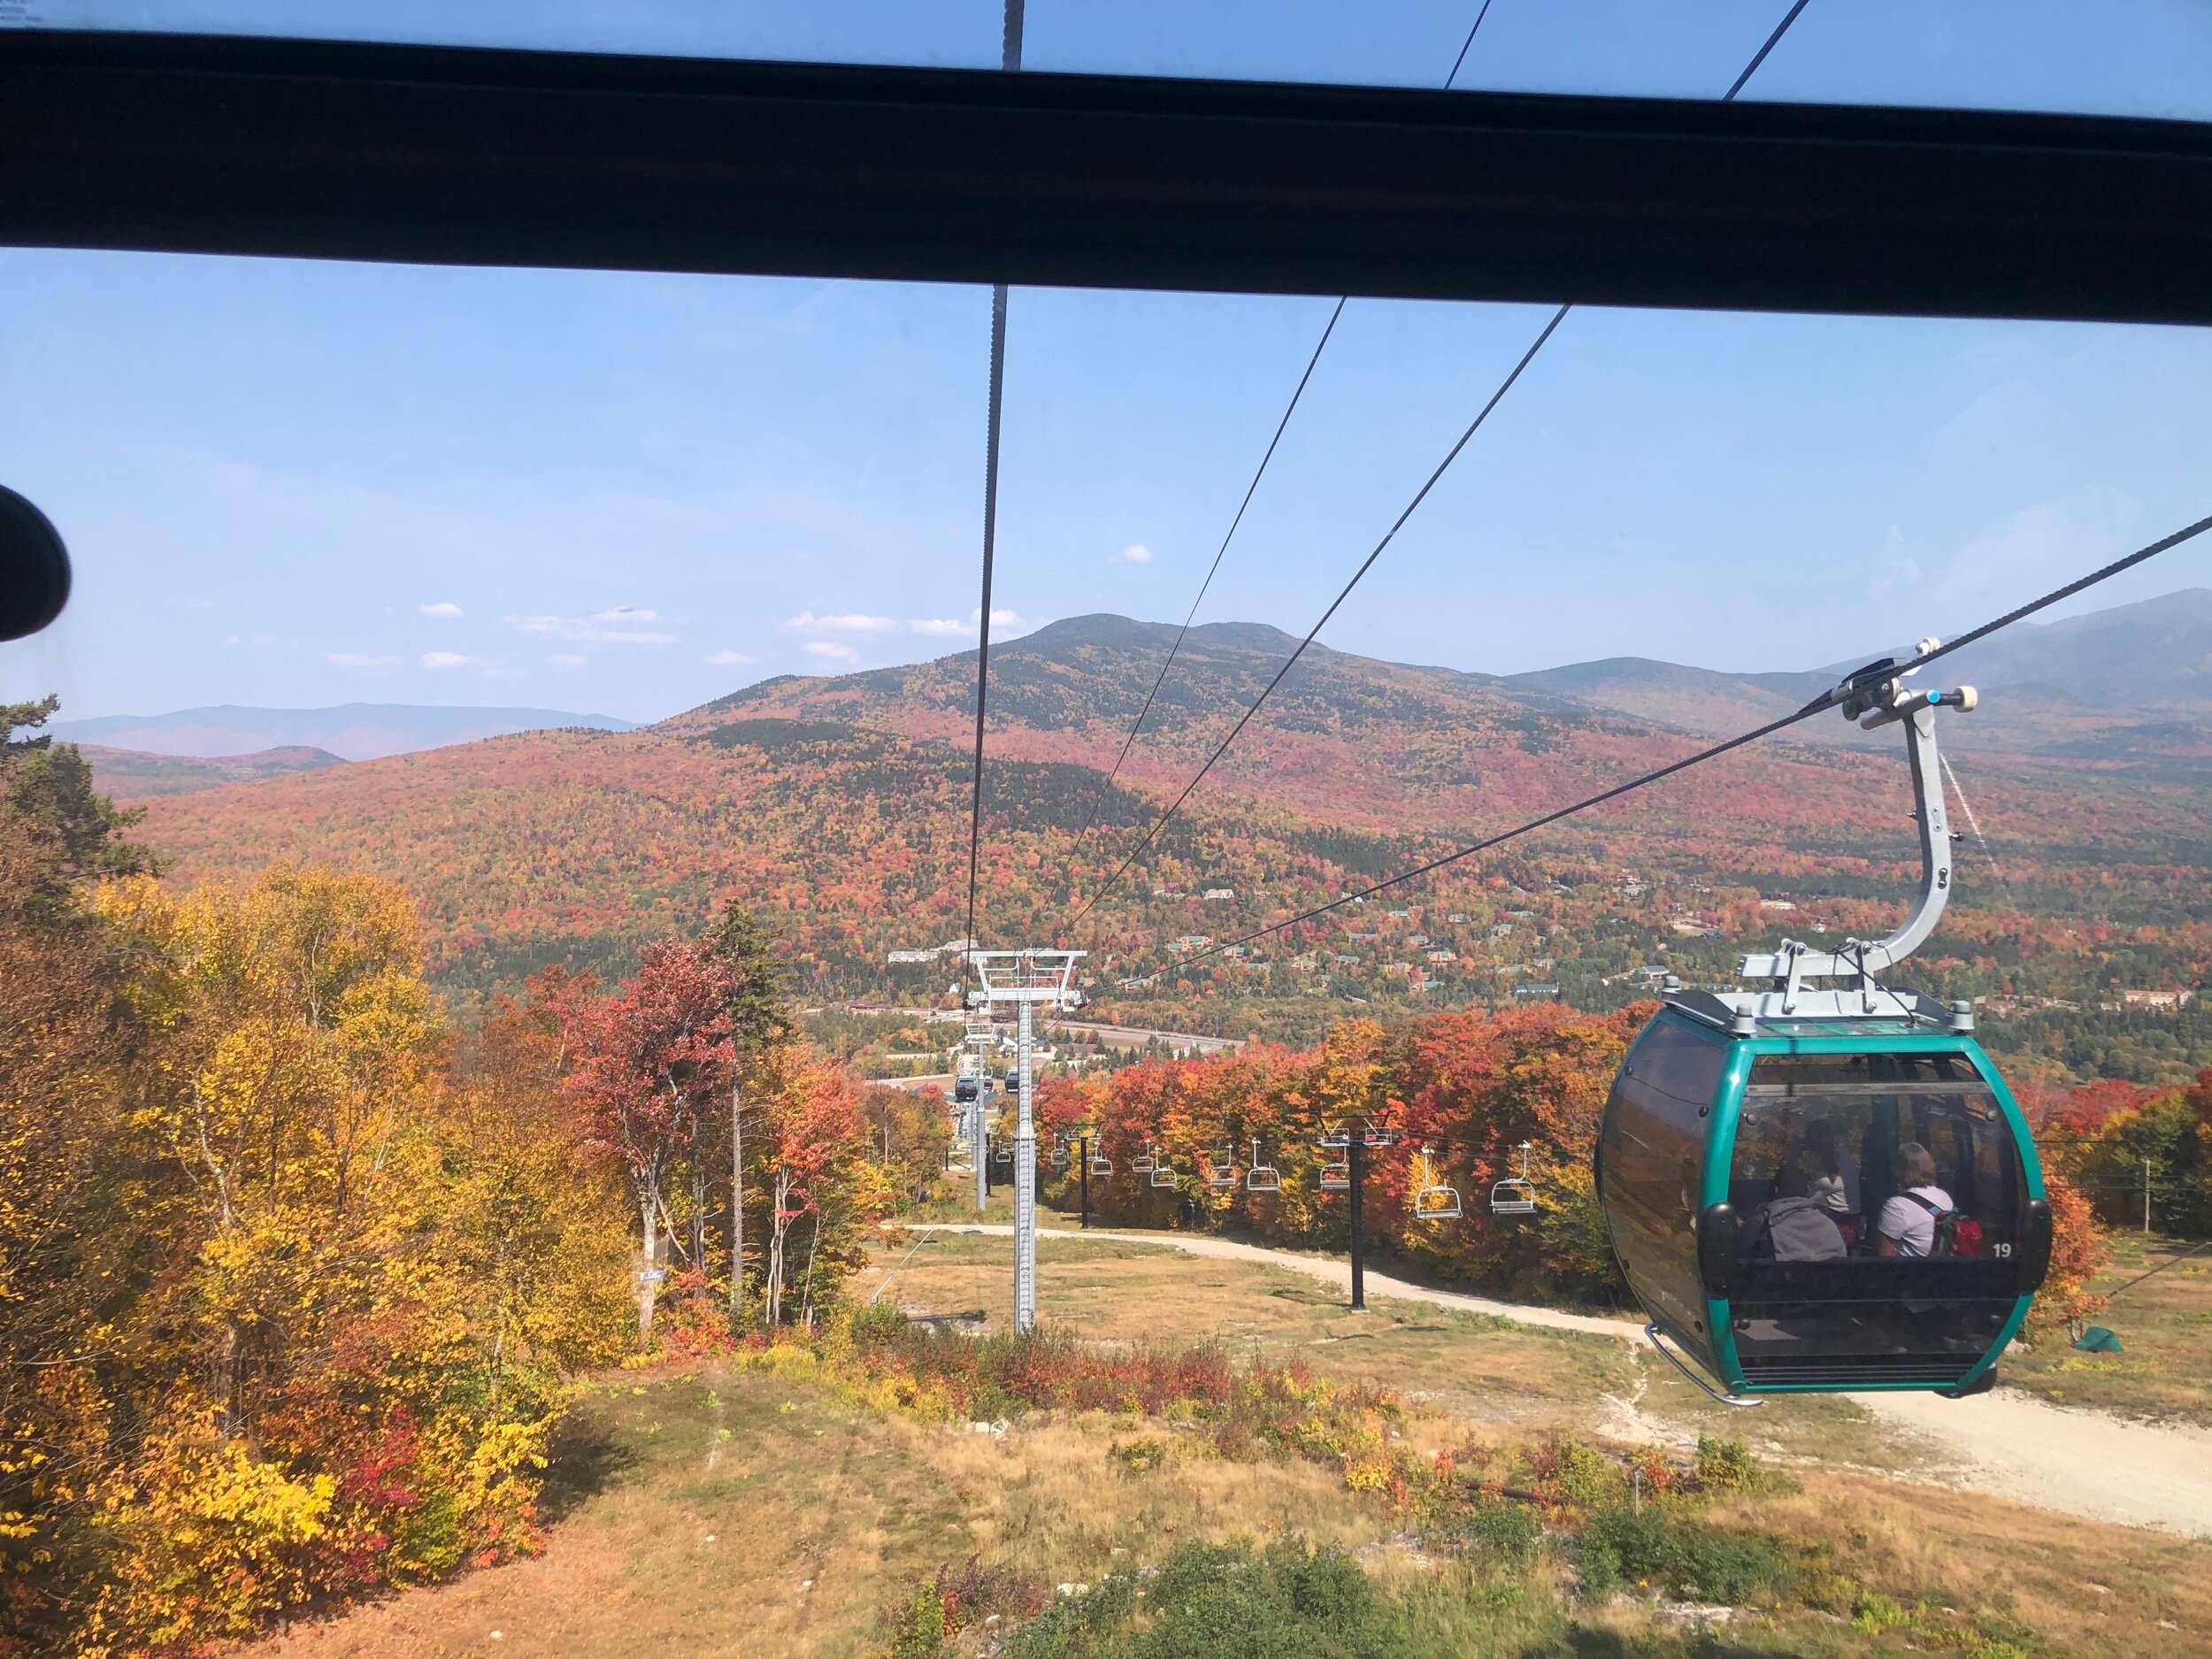 Views from the Bretton Woods Gondola